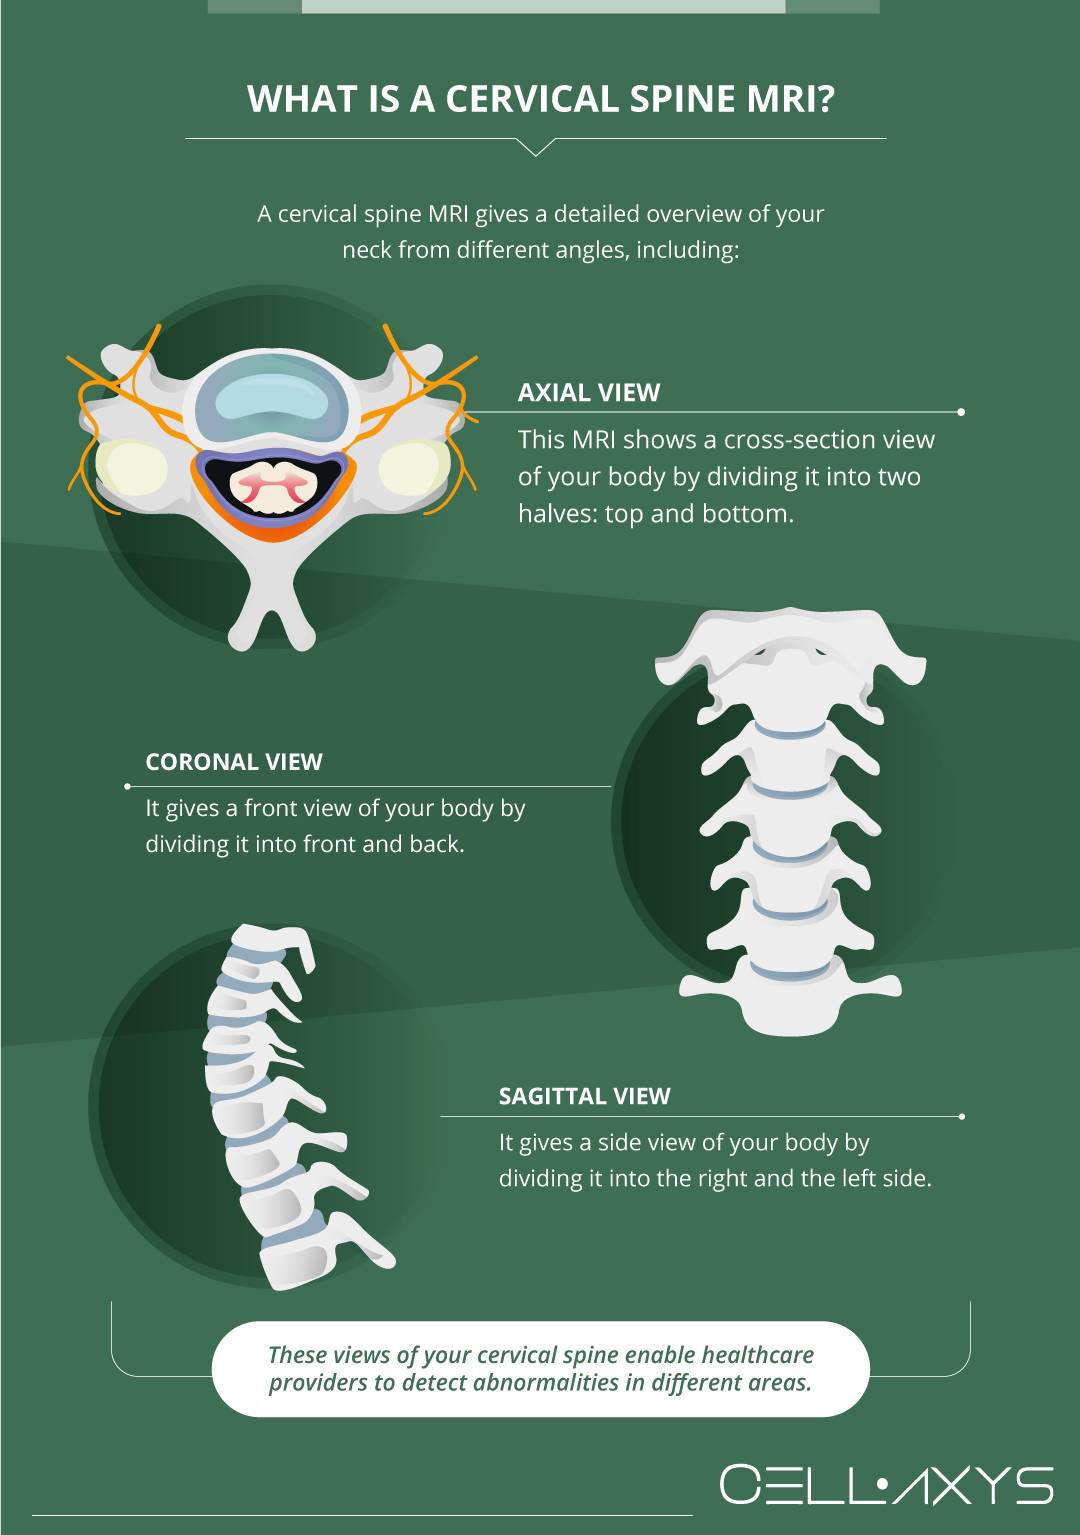 What Is a Cervical Spine MRI?